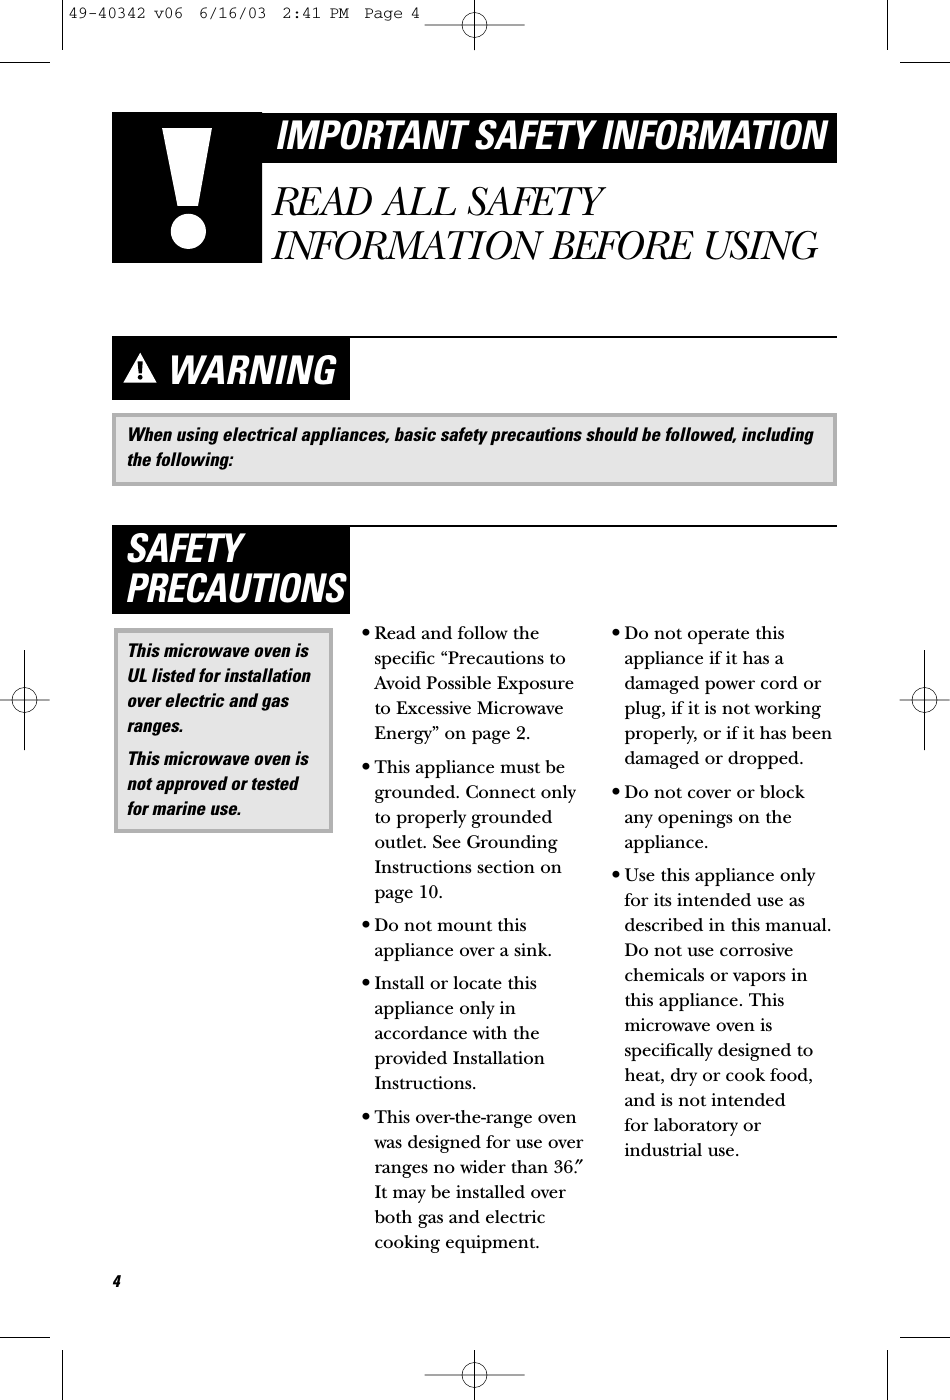 When using electrical appliances, basic safety precautions should be followed, includingthe following:WARNING•Read and follow thespecific “Precautions toAvoid Possible Exposureto Excessive MicrowaveEnergy” on page 2.•This appliance must begrounded. Connect onlyto properly groundedoutlet. See GroundingInstructions section onpage 10.•Do not mount thisappliance over a sink. •Install or locate thisappliance only inaccordance with theprovided InstallationInstructions.•This over-the-range ovenwas designed for use overranges no wider than 36.″It may be installed overboth gas and electriccooking equipment.•Do not operate thisappliance if it has adamaged power cord orplug, if it is not workingproperly, or if it has beendamaged or dropped.•Do not cover or block any openings on theappliance.•Use this appliance onlyfor its intended use asdescribed in this manual.Do not use corrosivechemicals or vapors inthis appliance. Thismicrowave oven isspecifically designed toheat, dry or cook food,and is not intended for laboratory orindustrial use.This microwave oven isUL listed for installationover electric and gasranges.This microwave oven isnot approved or testedfor marine use.SAFETYPRECAUTIONS4IMPORTANT SAFETY INFORMATIONREAD ALL SAFETYINFORMATION BEFORE USING49-40342 v06  6/16/03  2:41 PM  Page 4